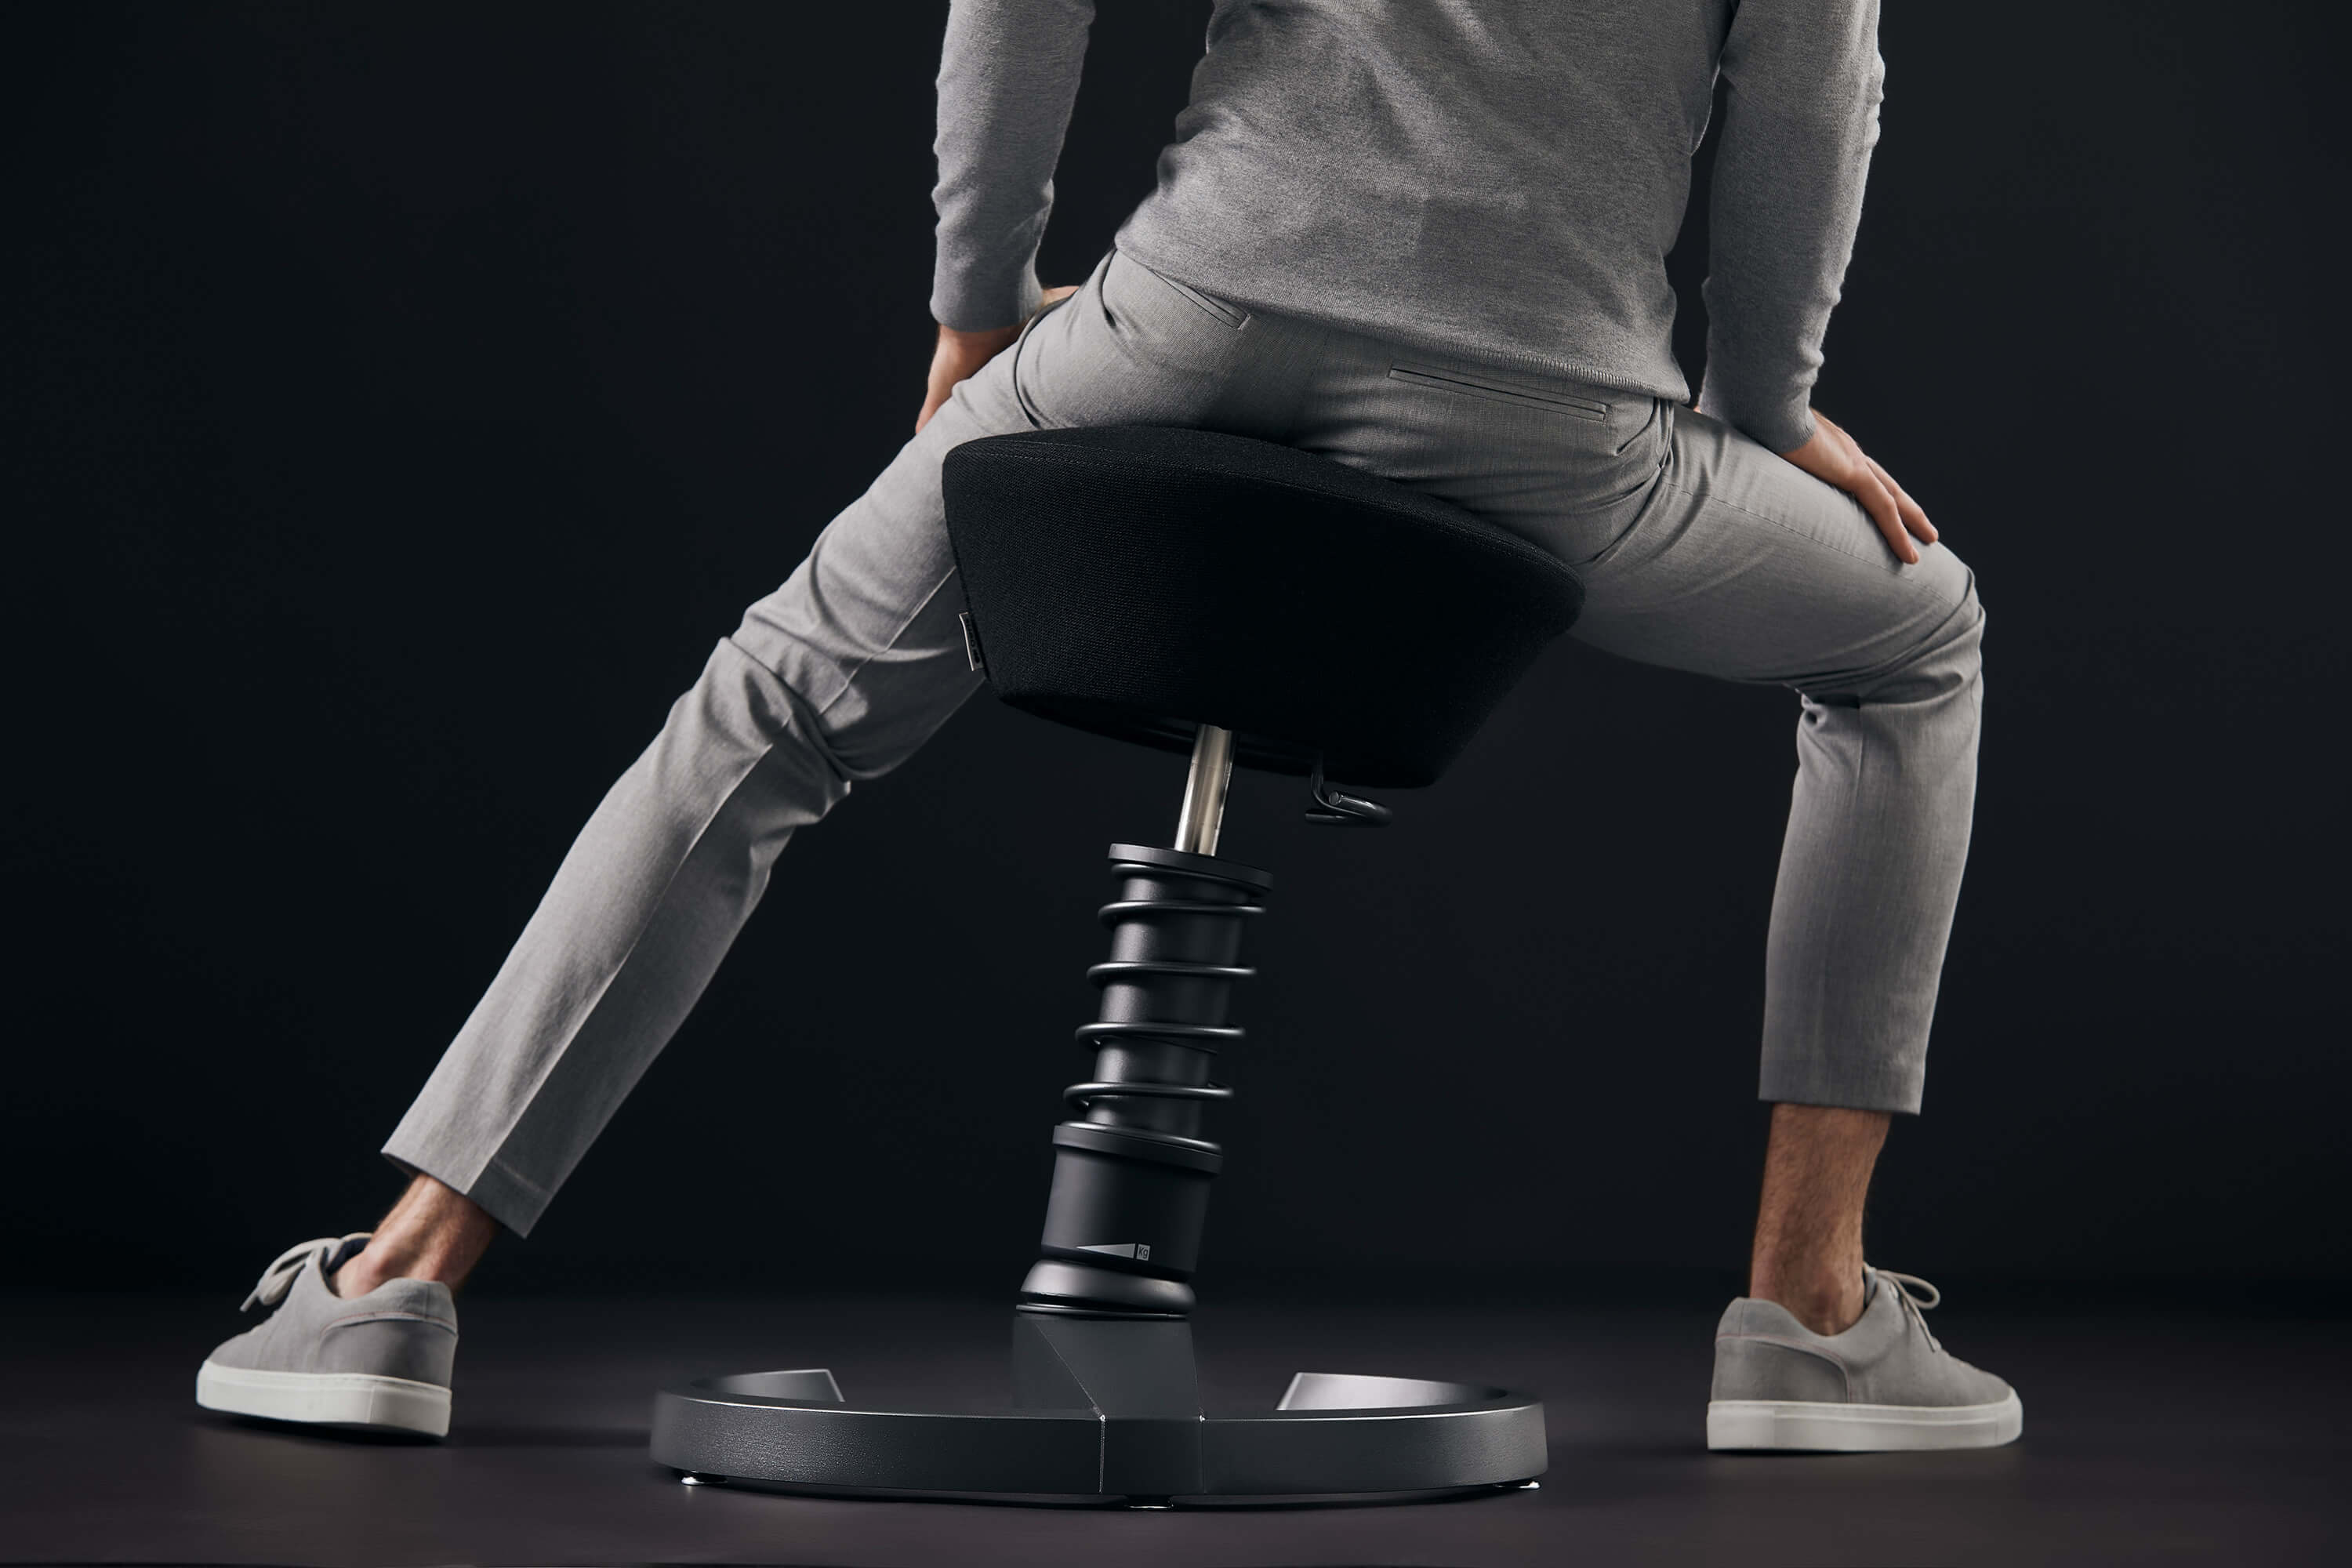 The office stool Aeris Swopper enables active dynamic sitting.